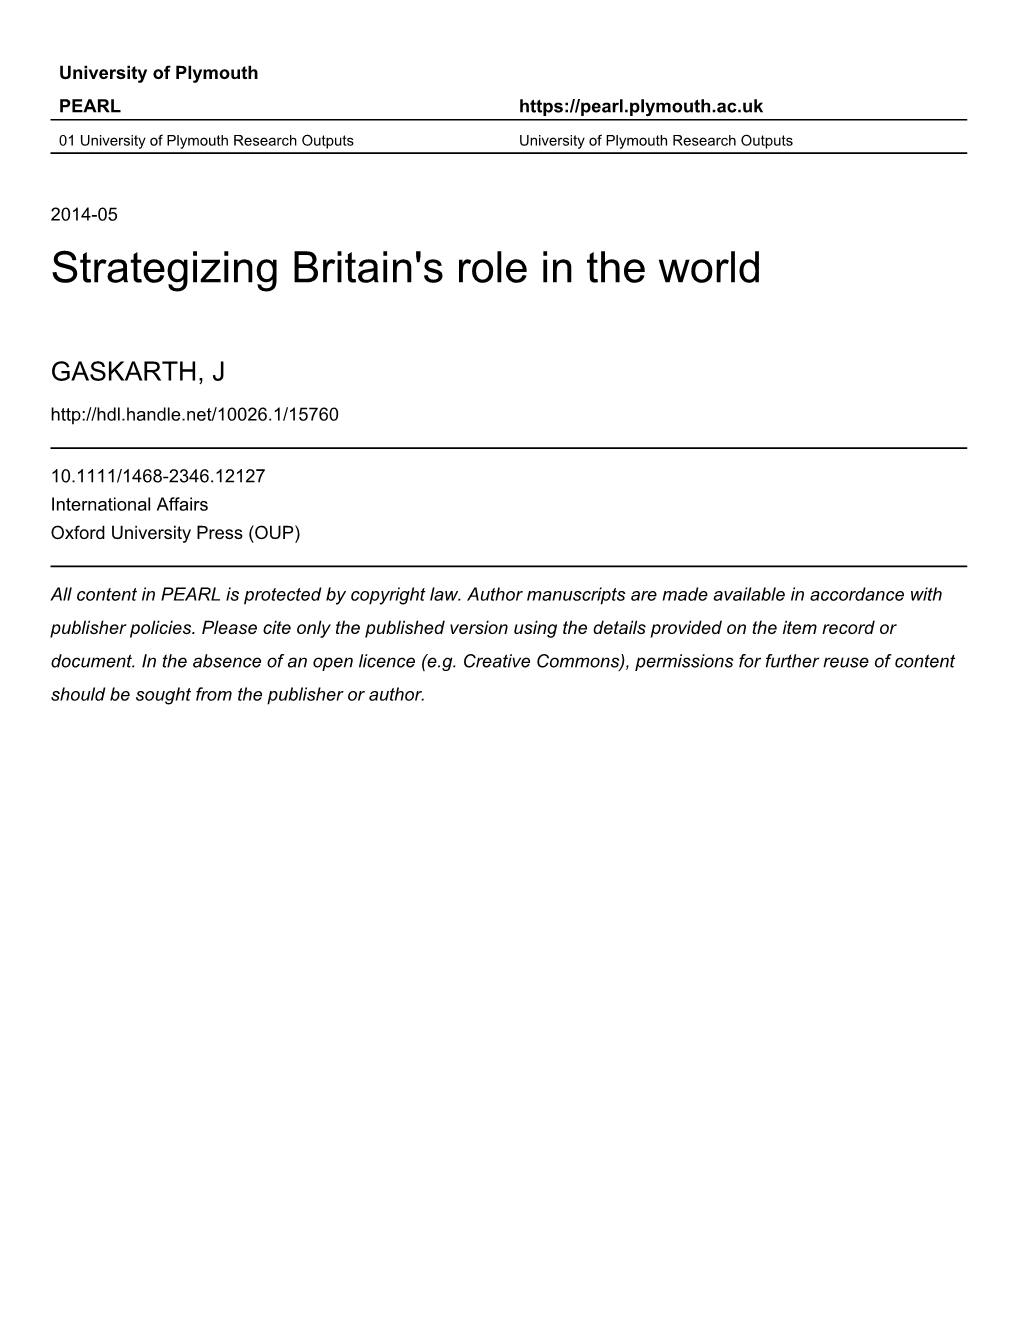 Strategizing Britains Role in the World